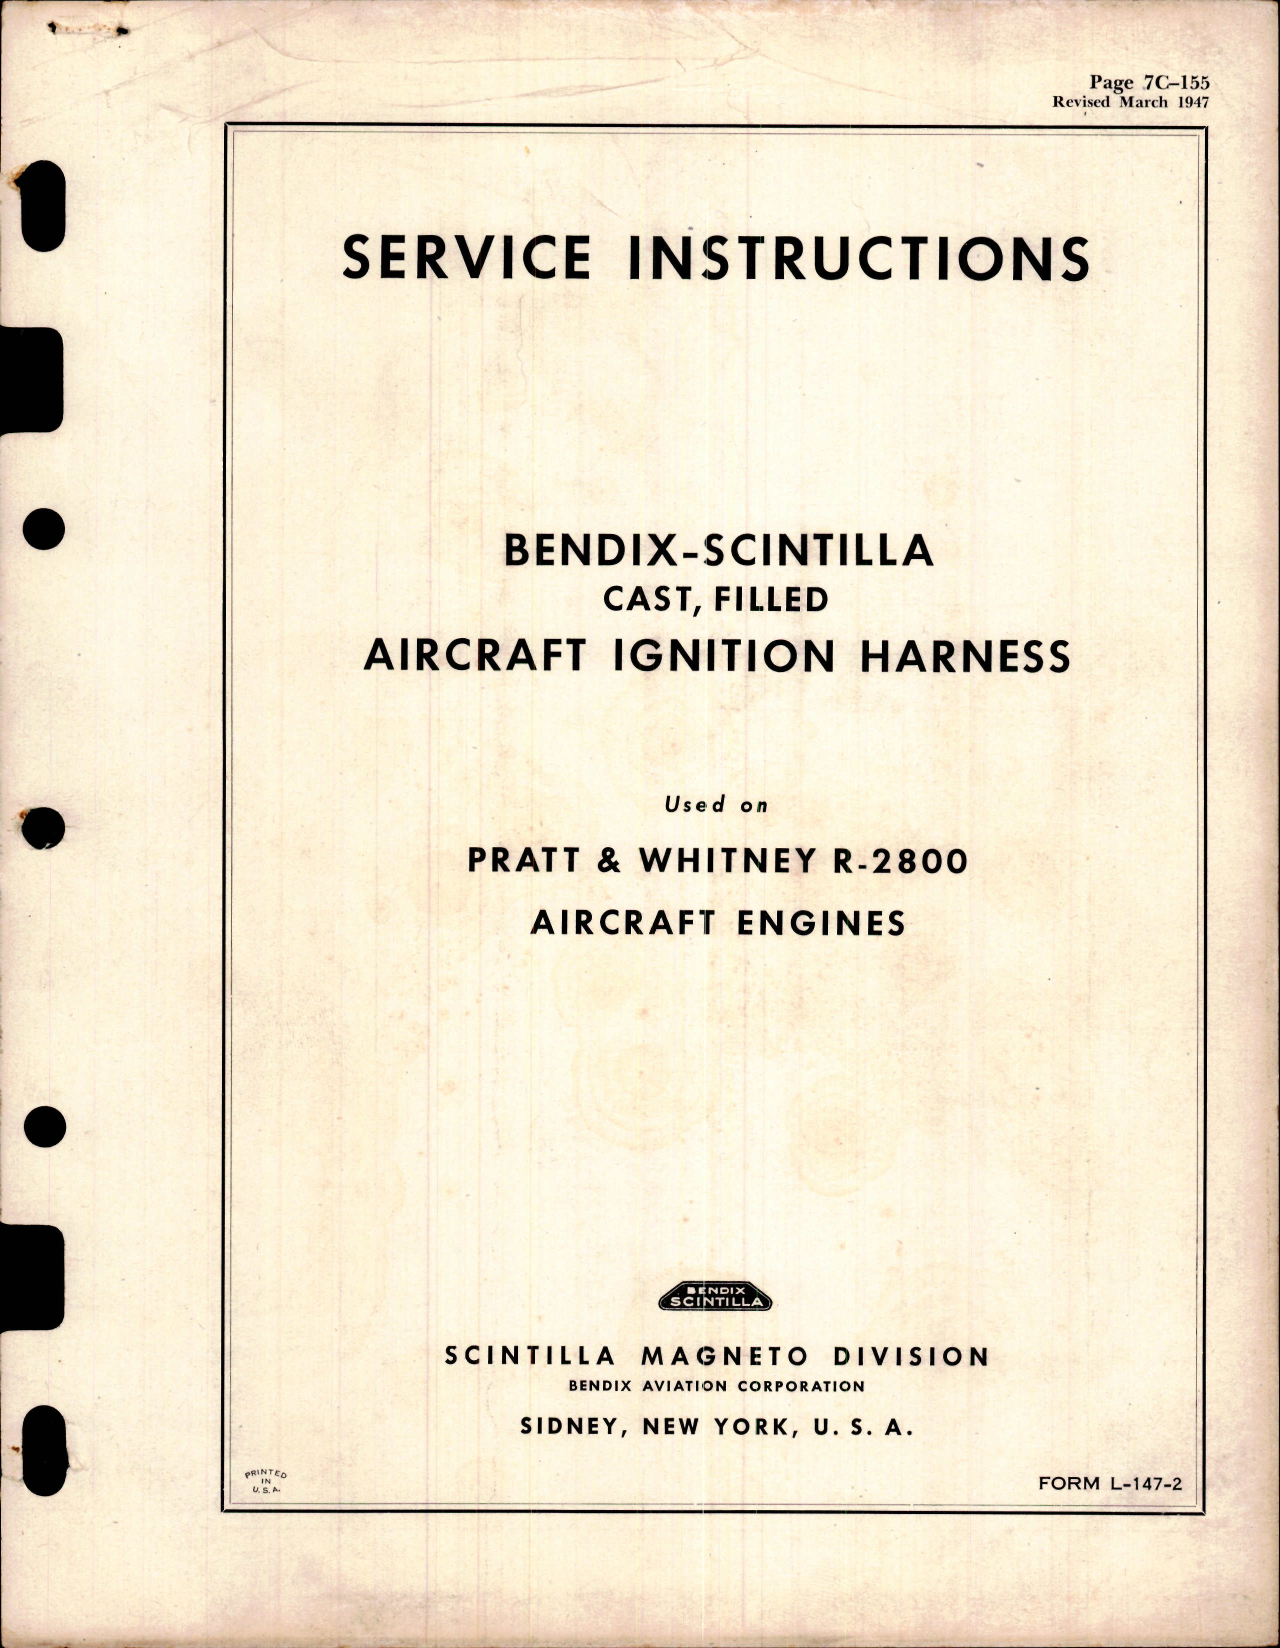 Sample page 1 from AirCorps Library document: Service Instructions for Bendix-Scintilla Cast, Filled Aircraft Ignition Harness